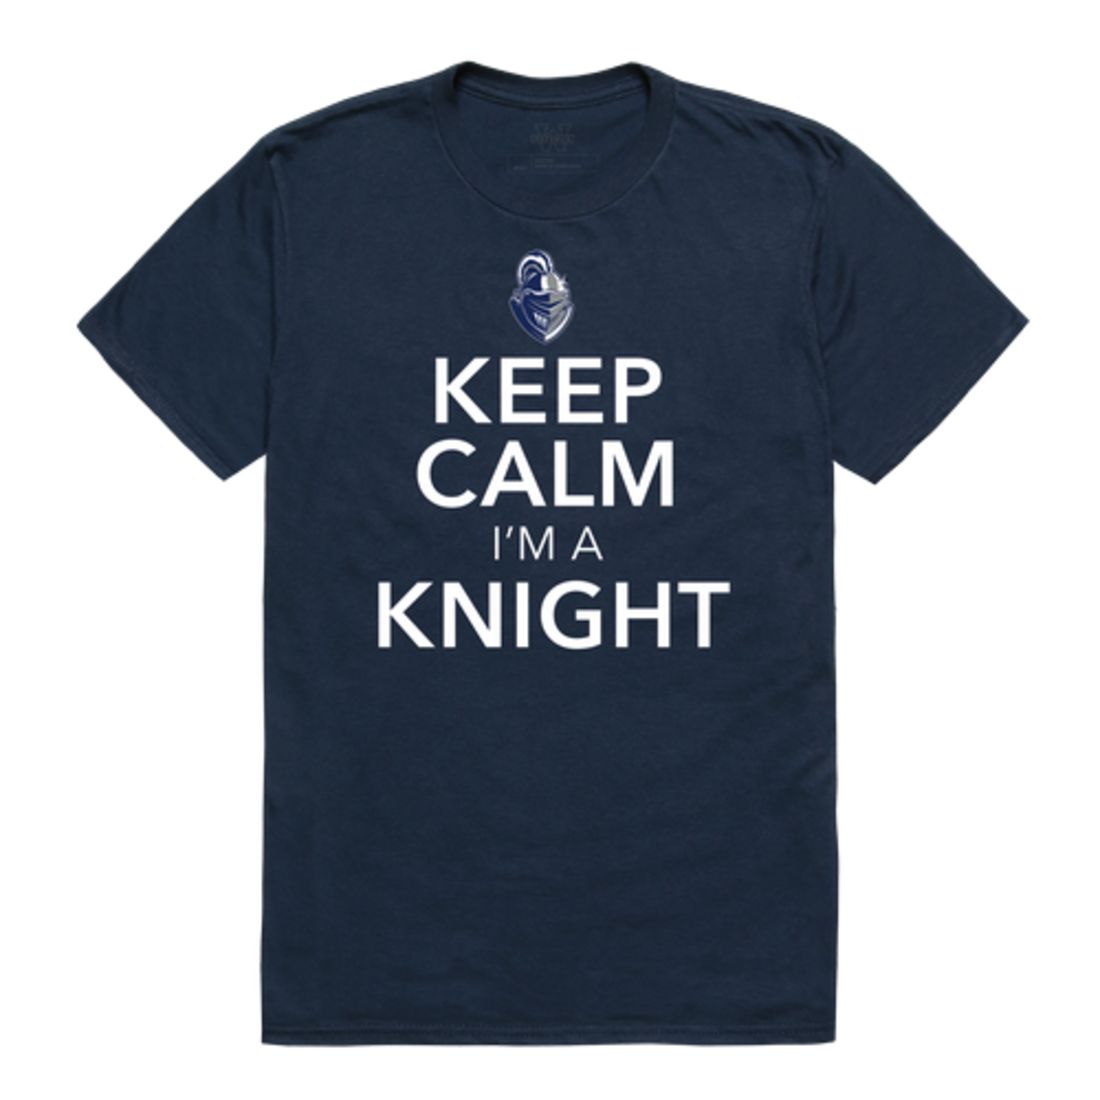 State University of New York at Geneseo Knights Keep Calm T-Shirt